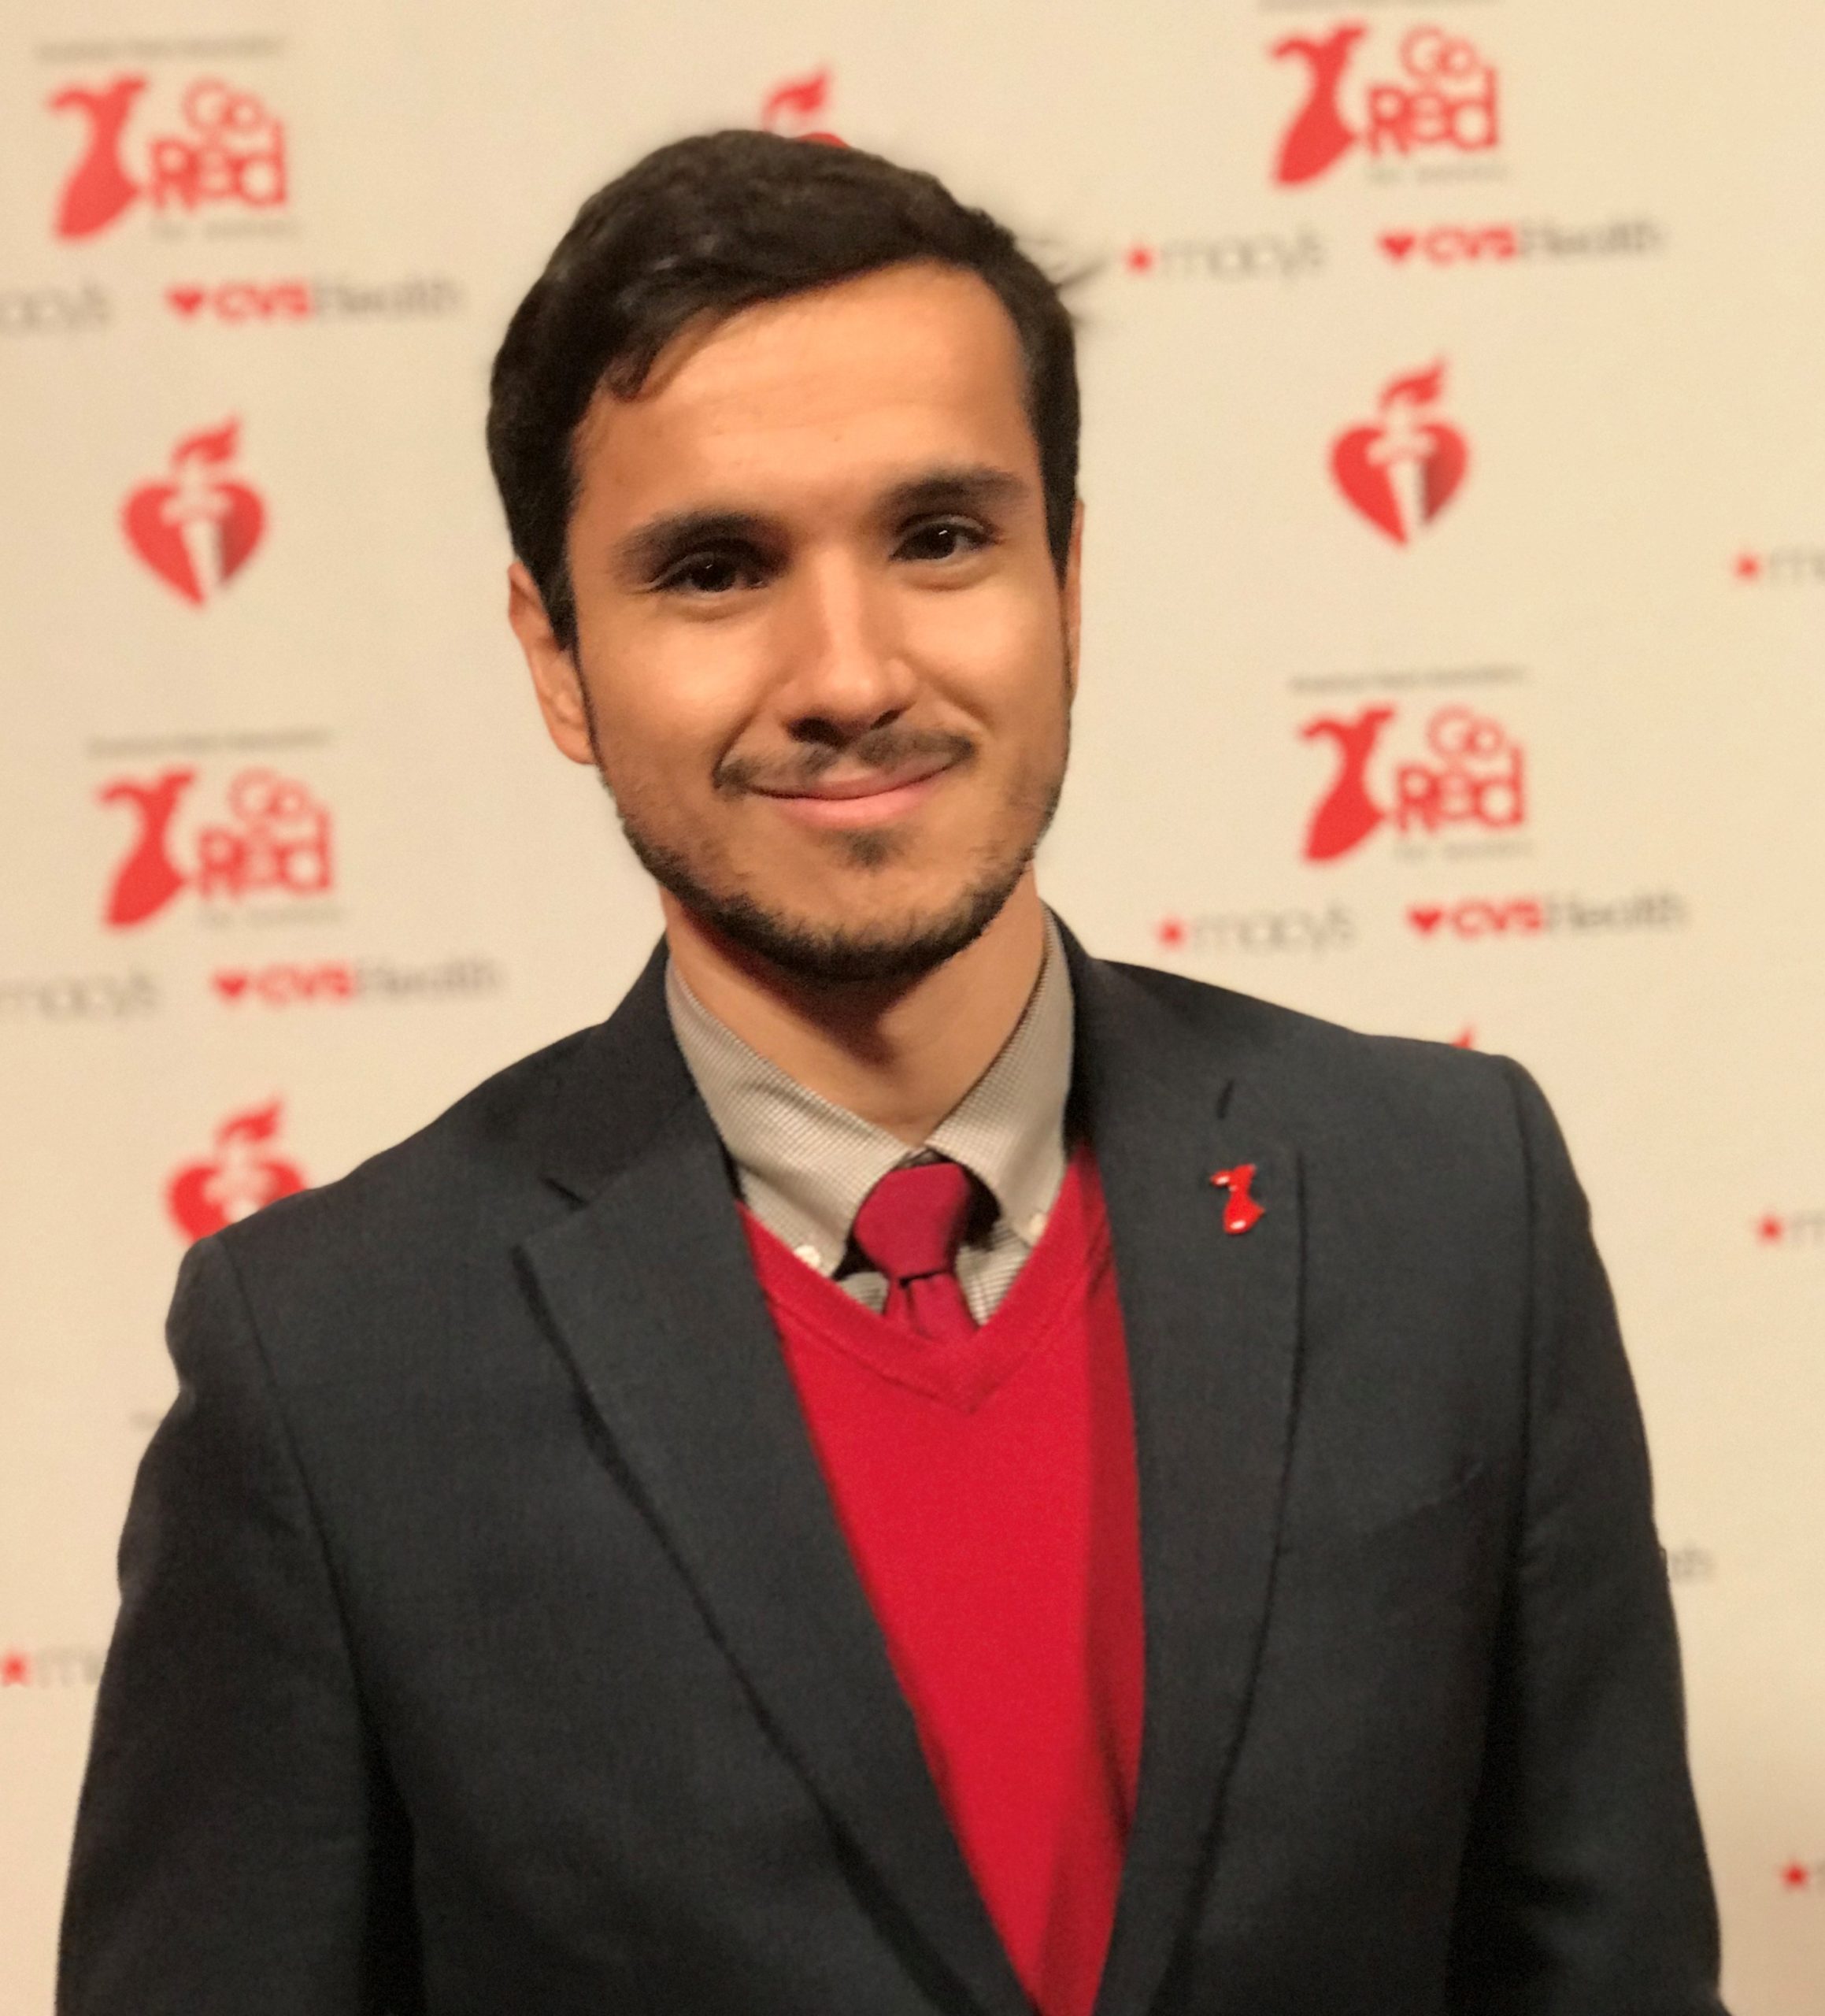 NYC Researcher to Receive the American Heart Association’s 2021 Basic Research Prize